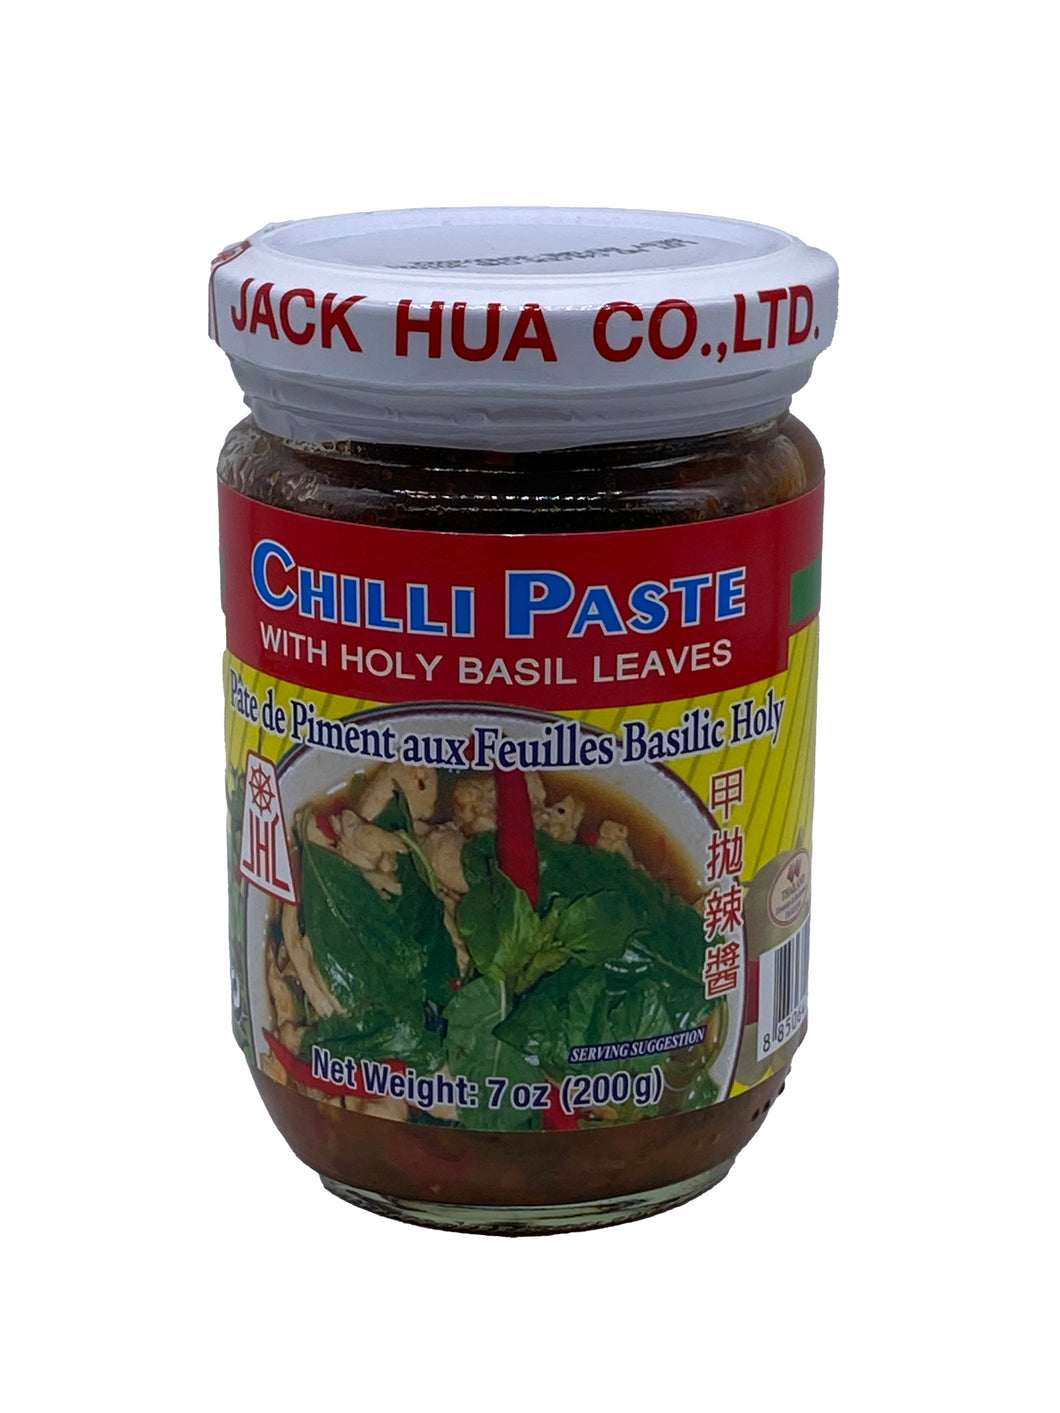 JHC Chili Paste with Holy Basil Leaves